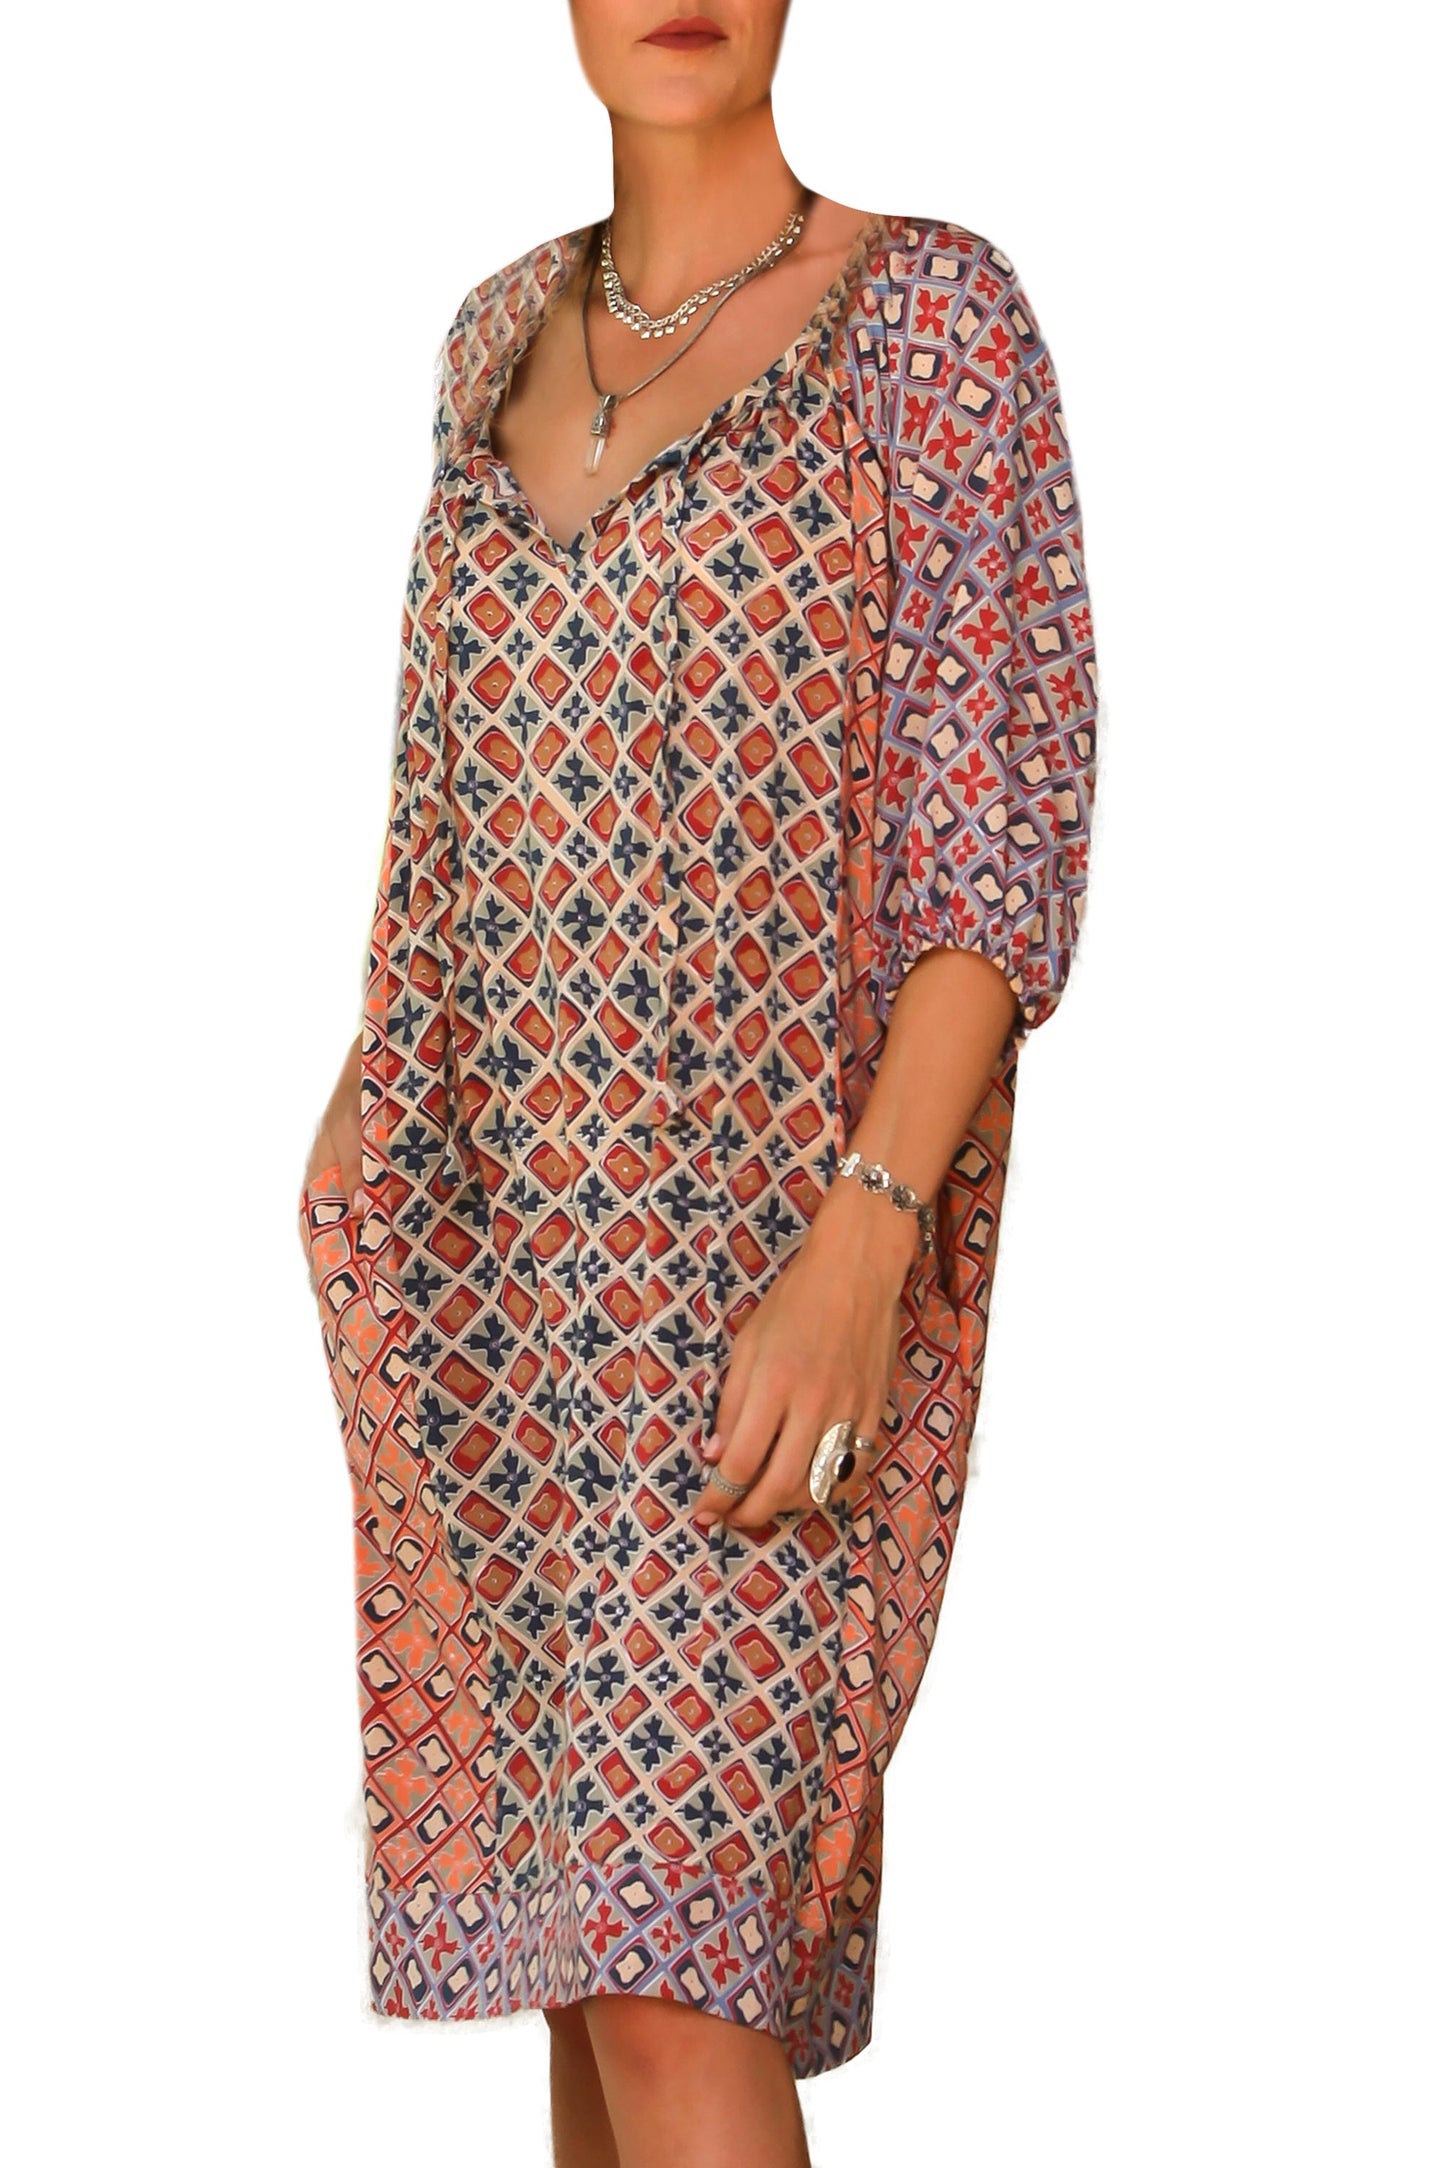 Kelud Crisscross Printed Rayon Tunic-Style Dress Crafted in Bali